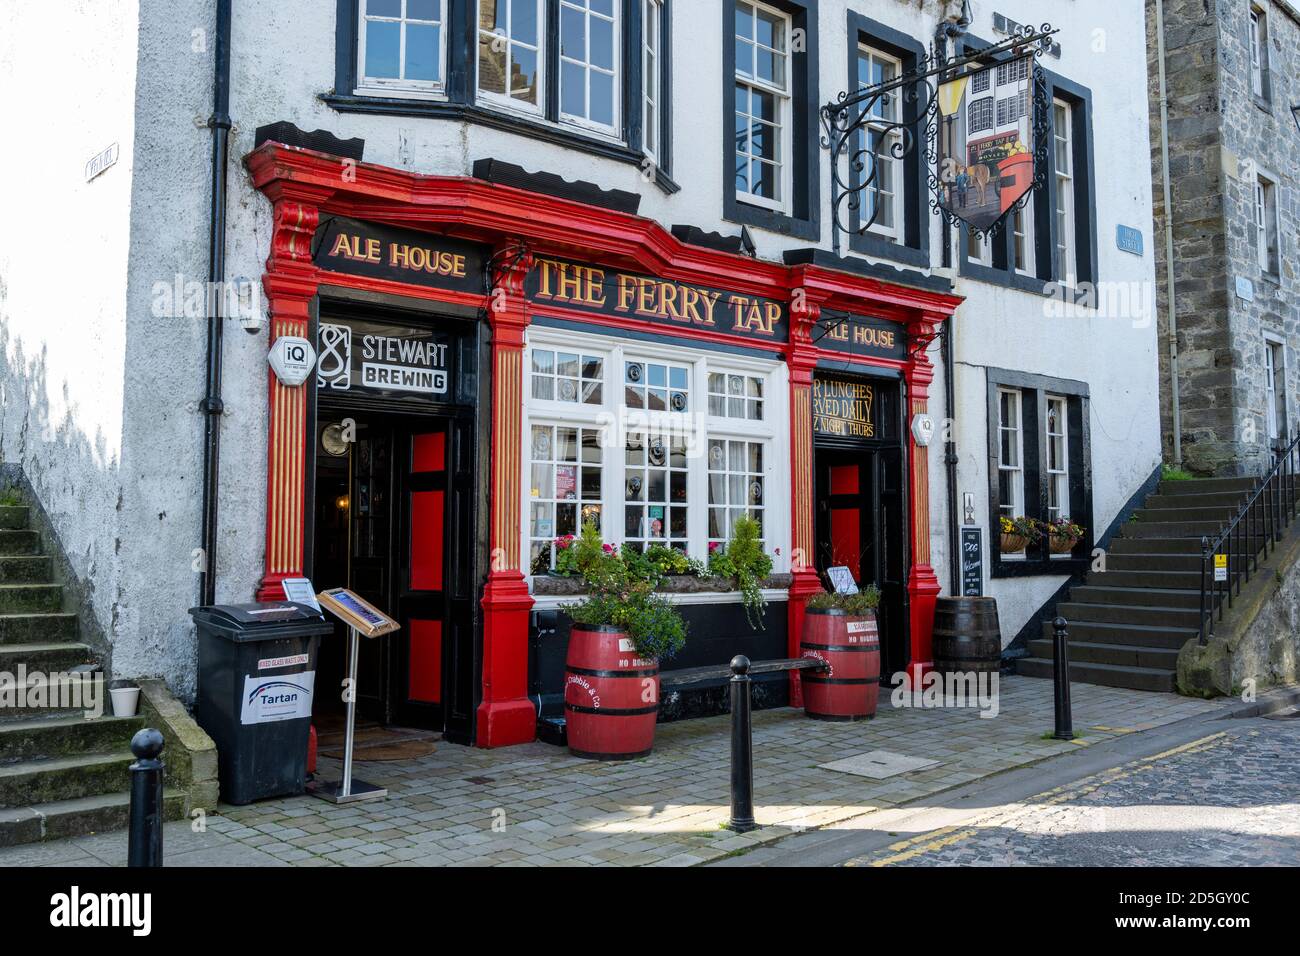 The Ferry Tap public house on the High Street in South Queensferry, Scotland, UK Stock Photo